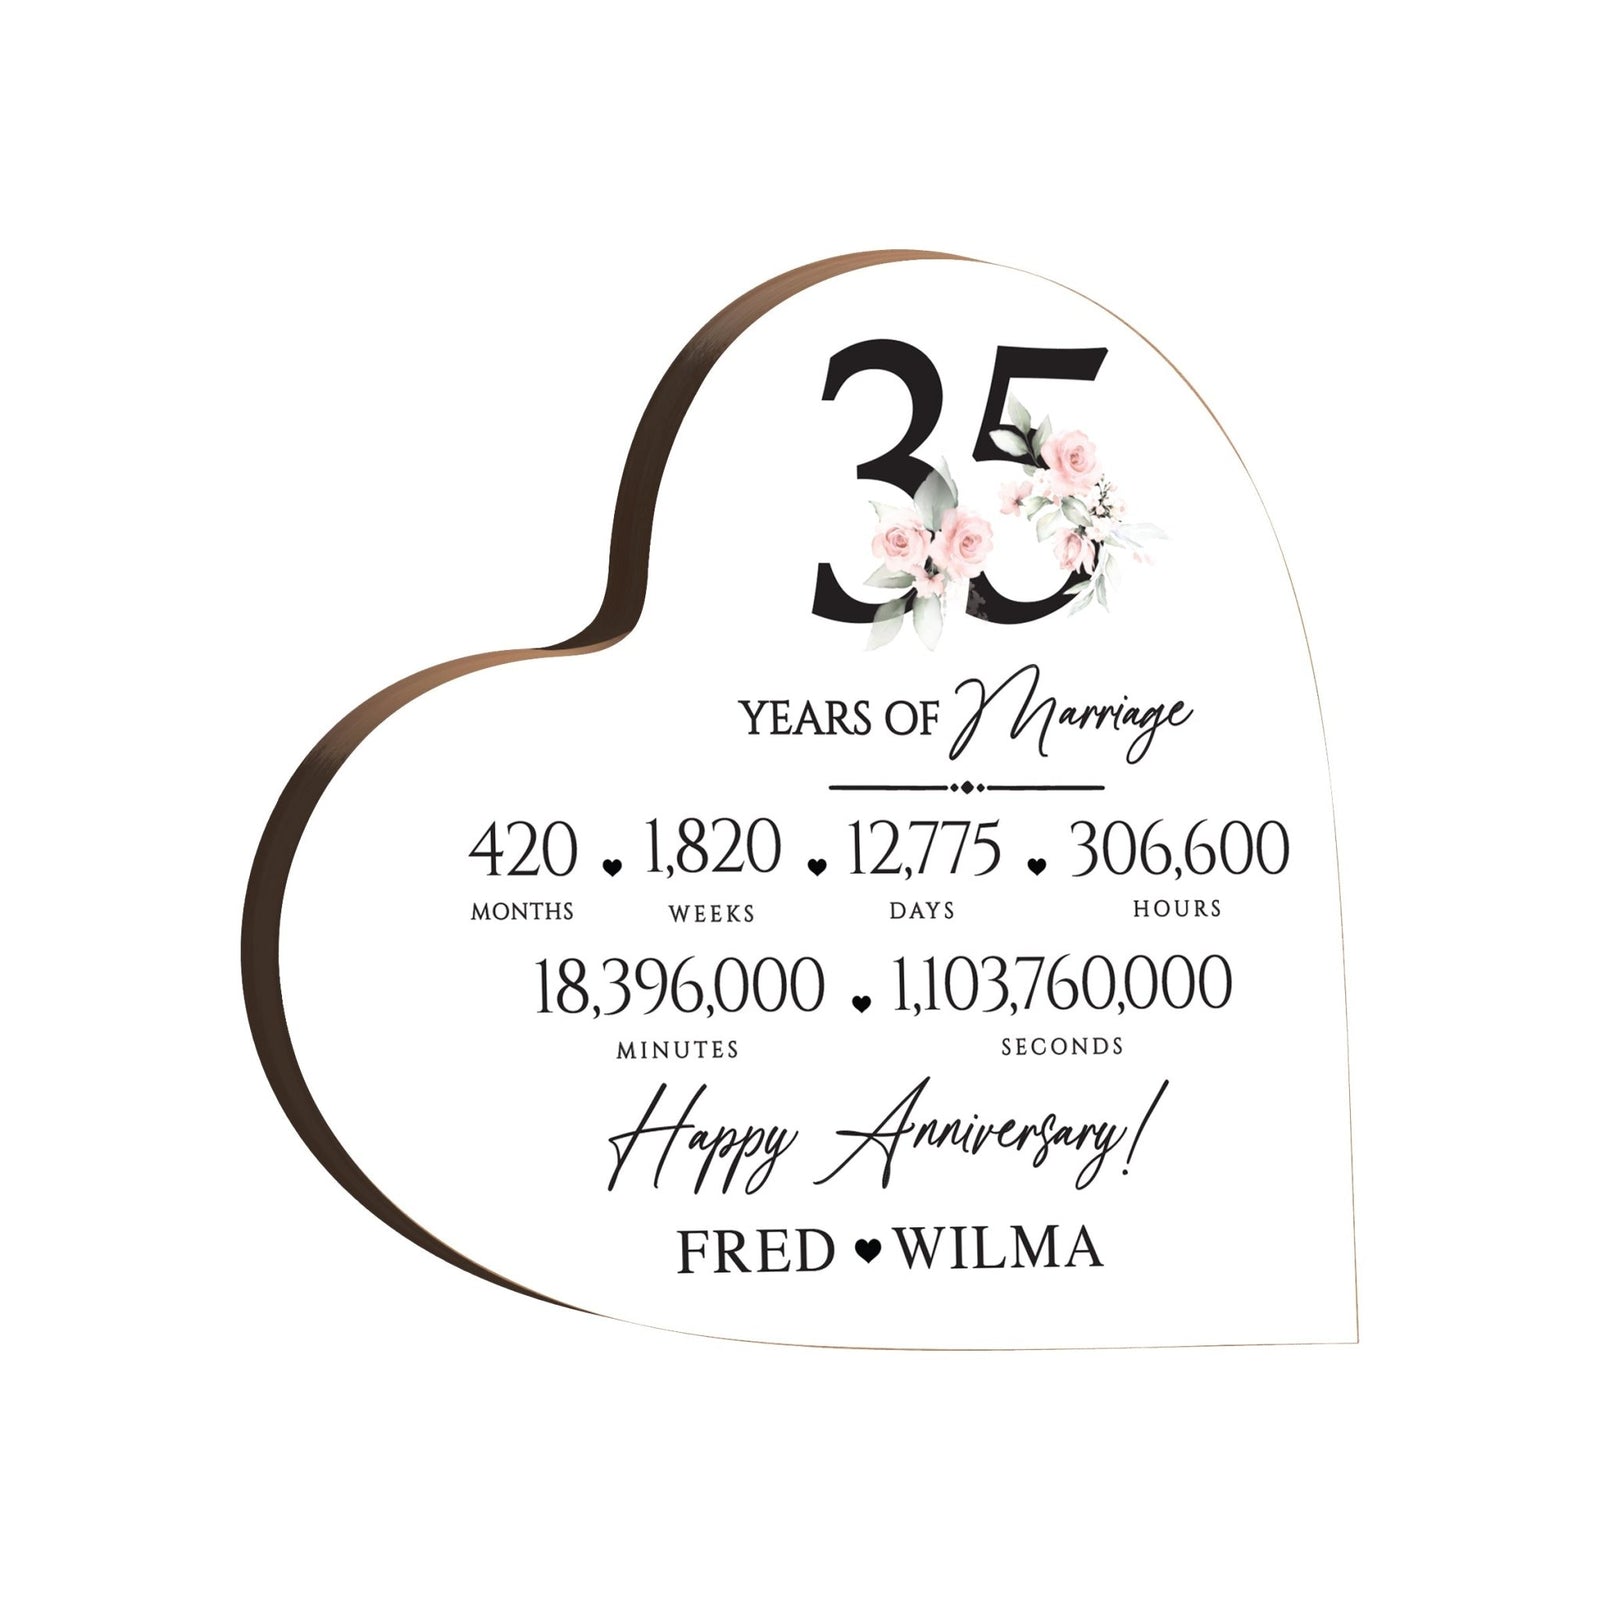 Personalized Wooden Anniversary Heart Shaped Signs - 35th Anniversary - LifeSong Milestones